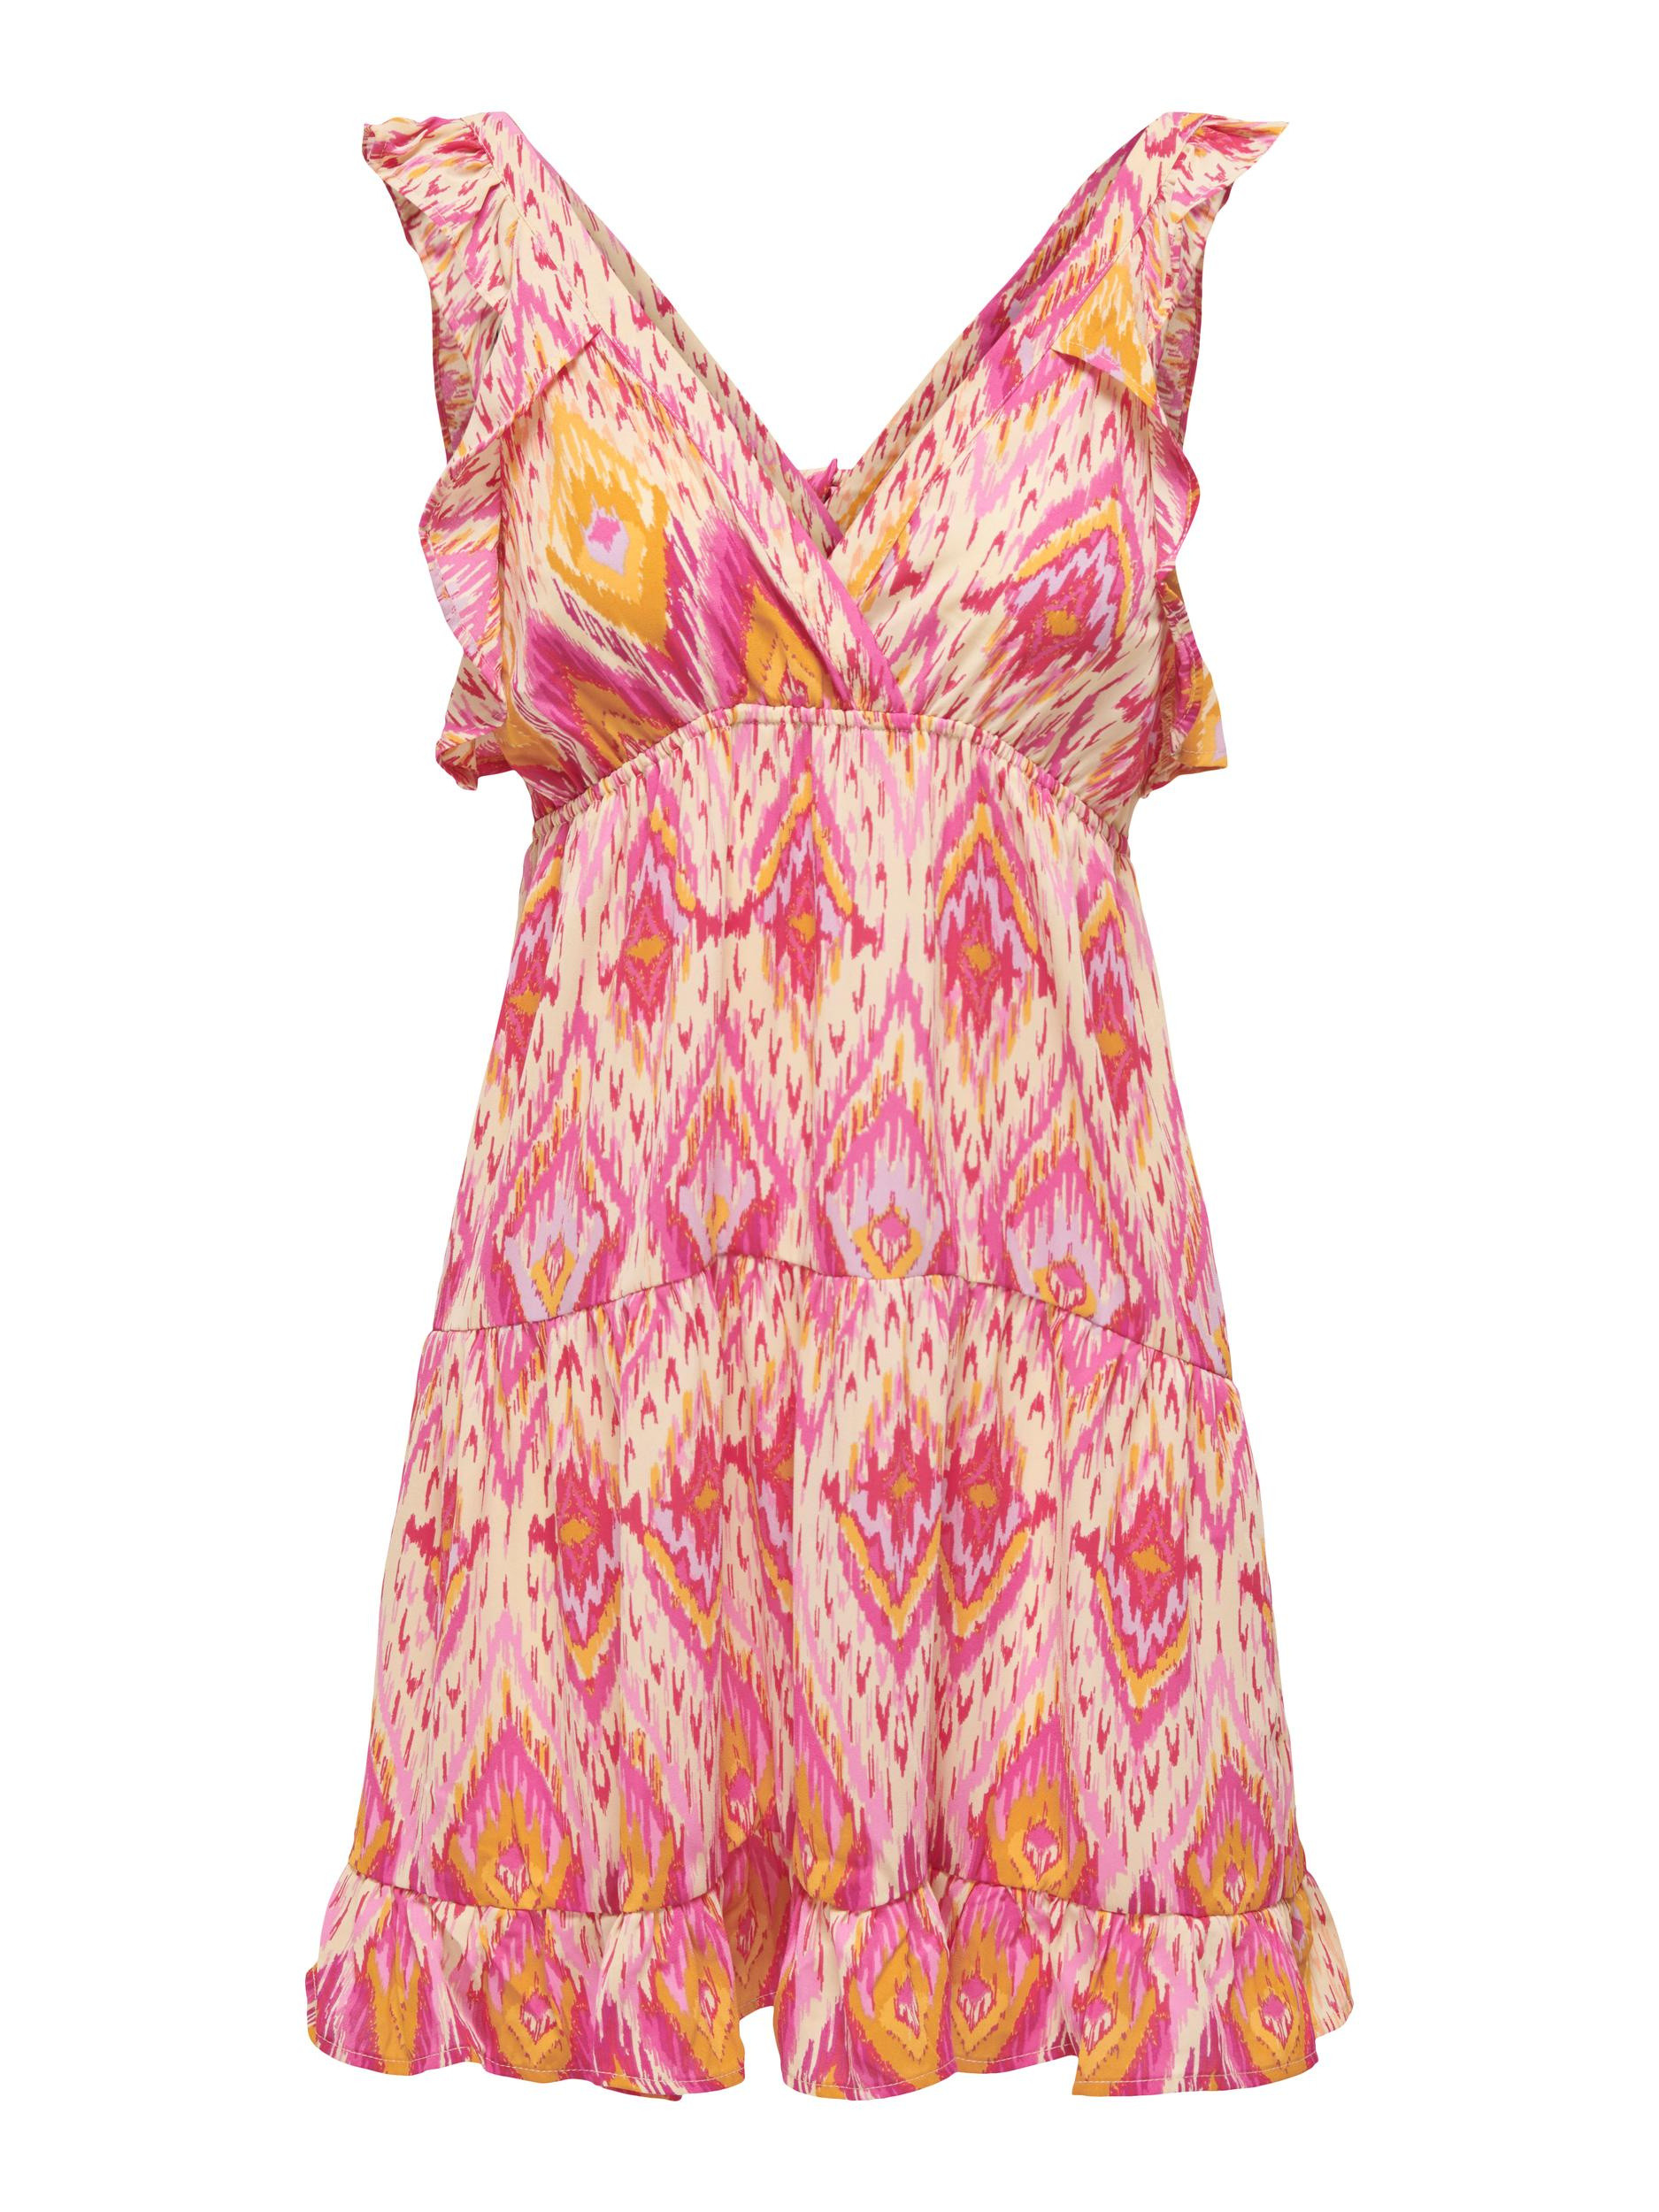 Only - Dress with print, Pink, large image number 0